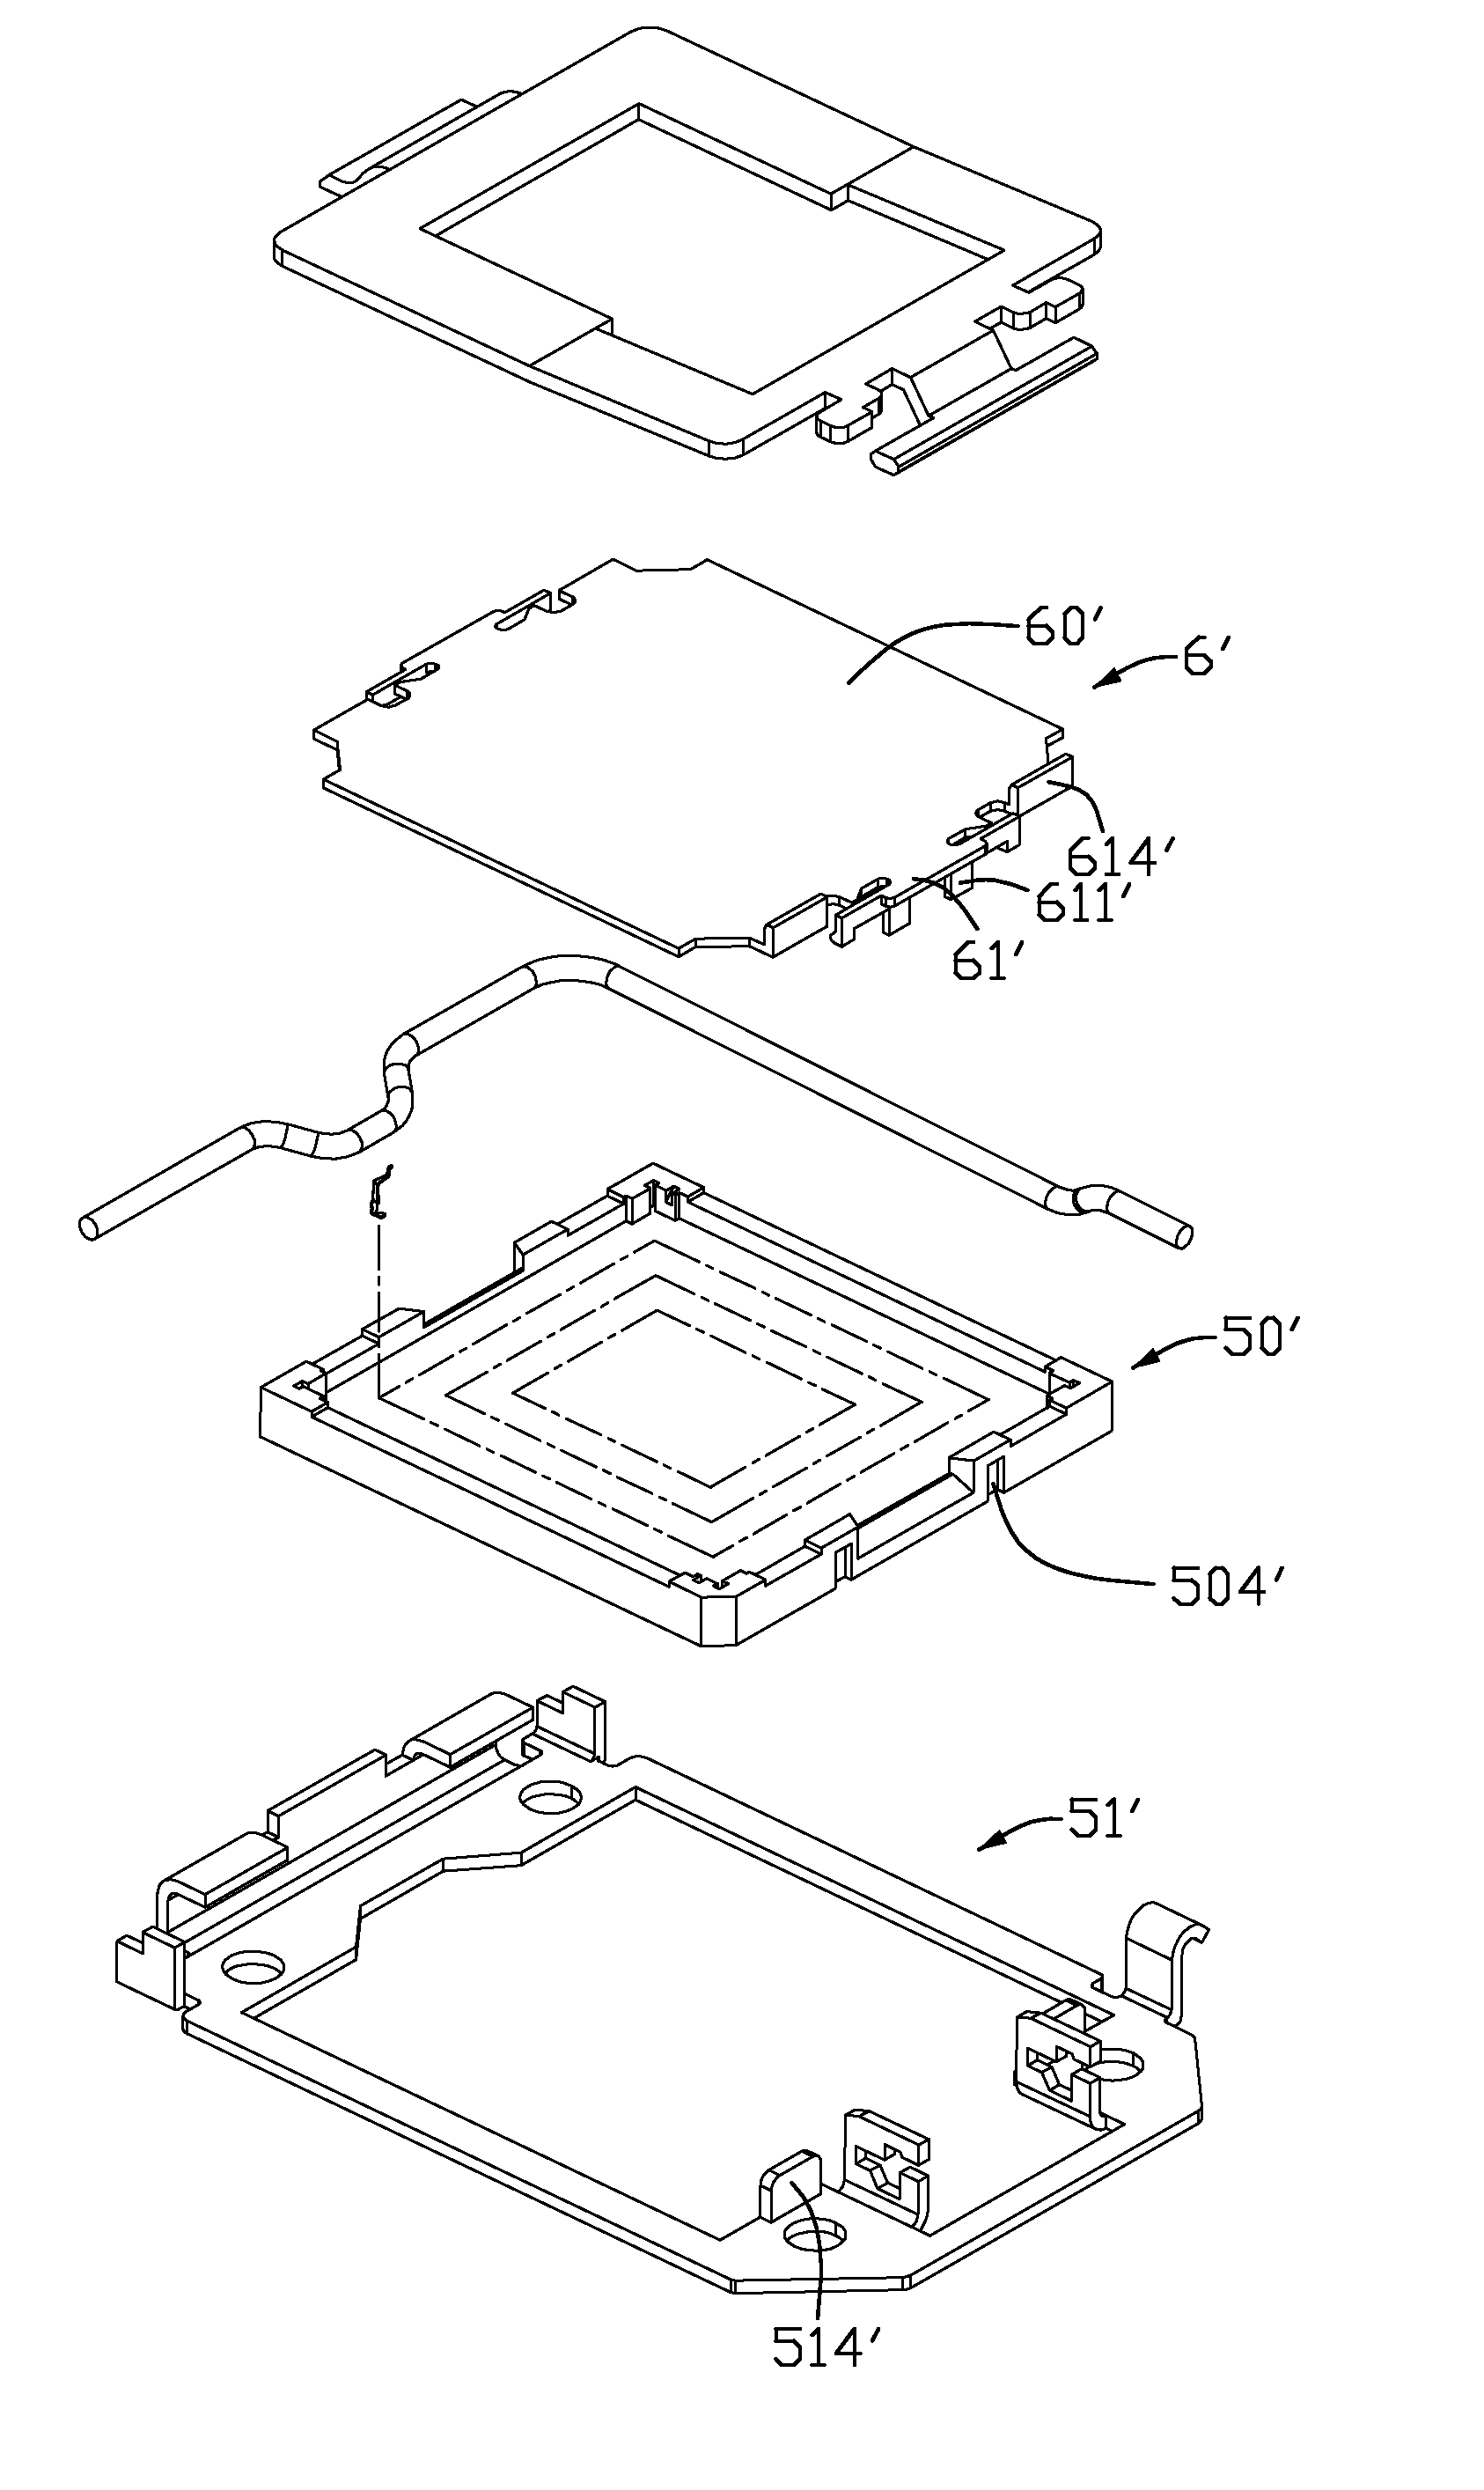 Electrical connector assembly having pick-up cap